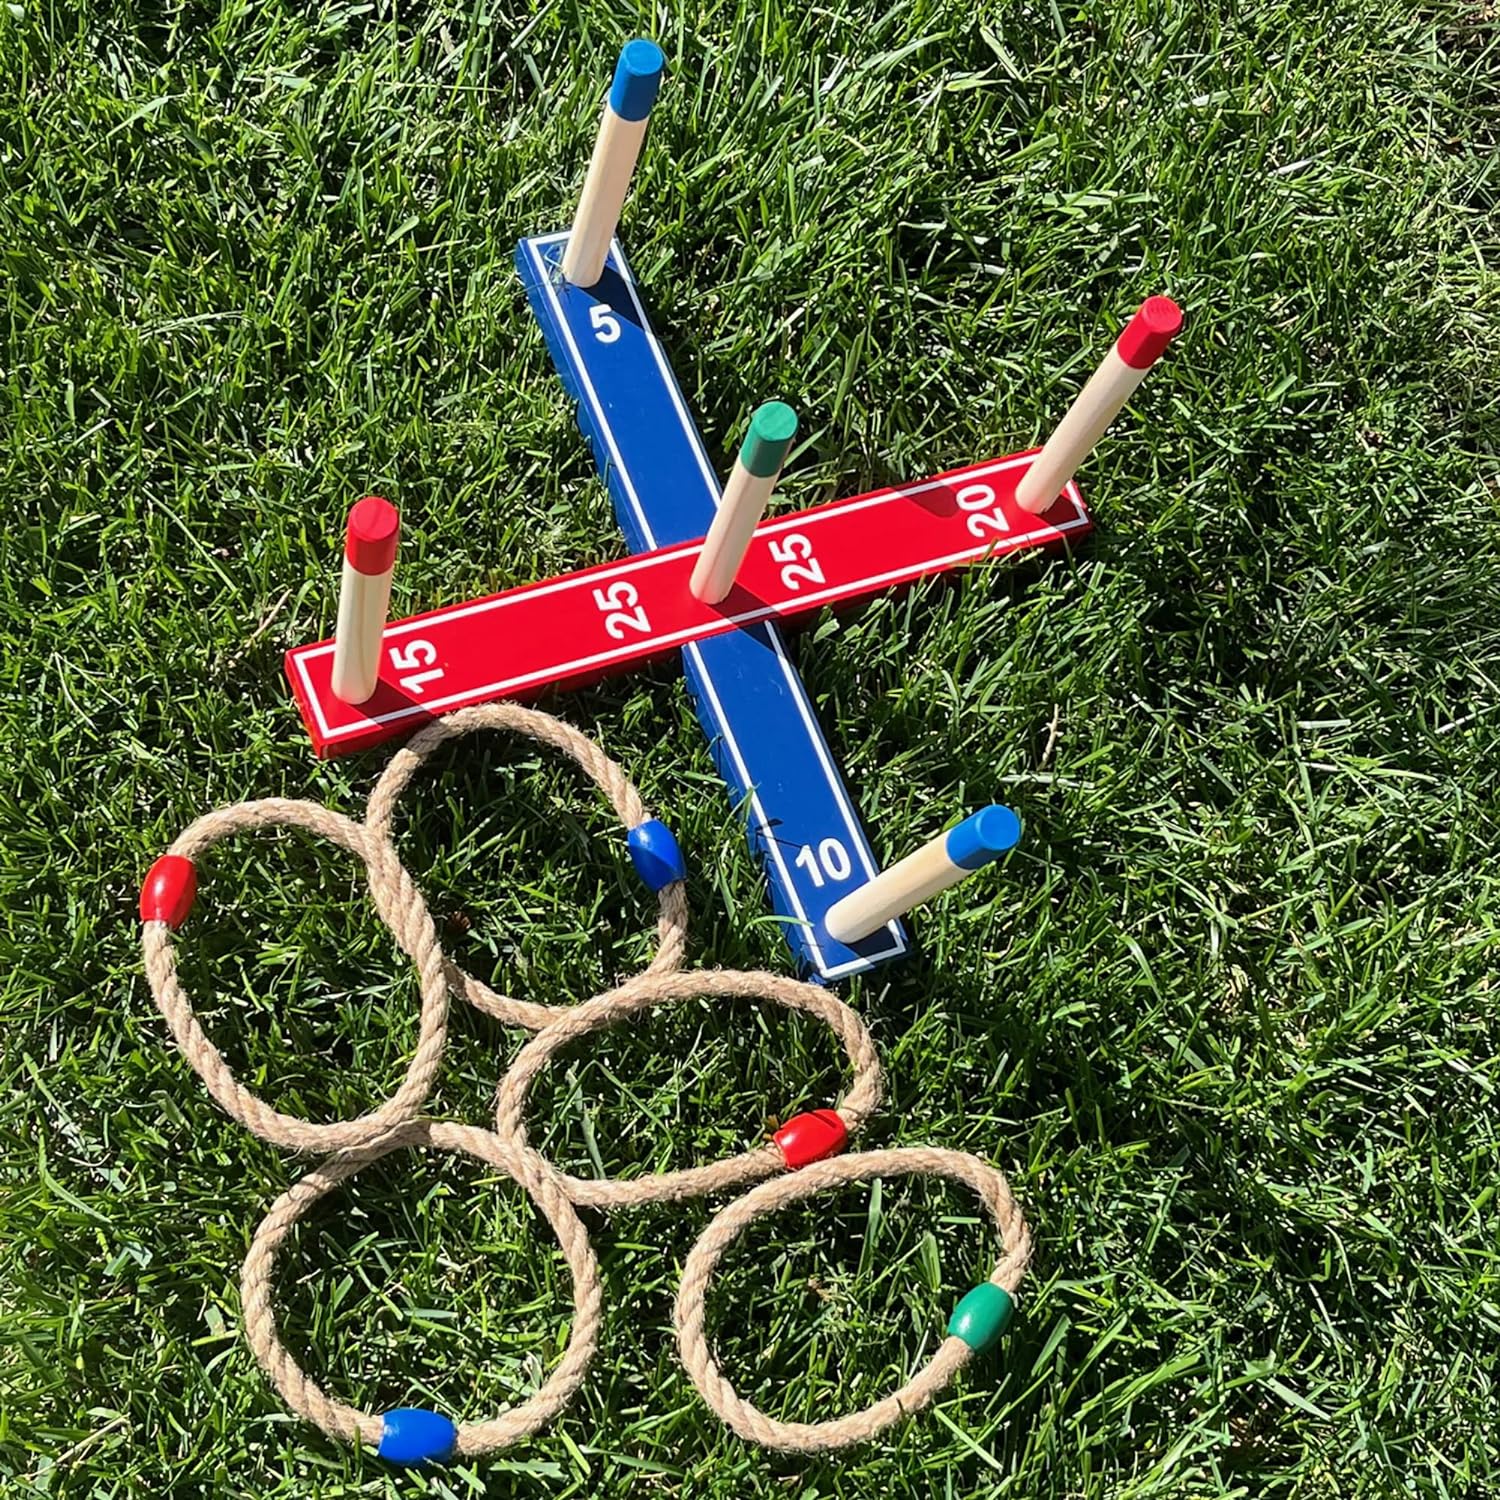 Creative Brainworks Wooden Ring Toss Game - indoor or outdoor yard game for adults & family